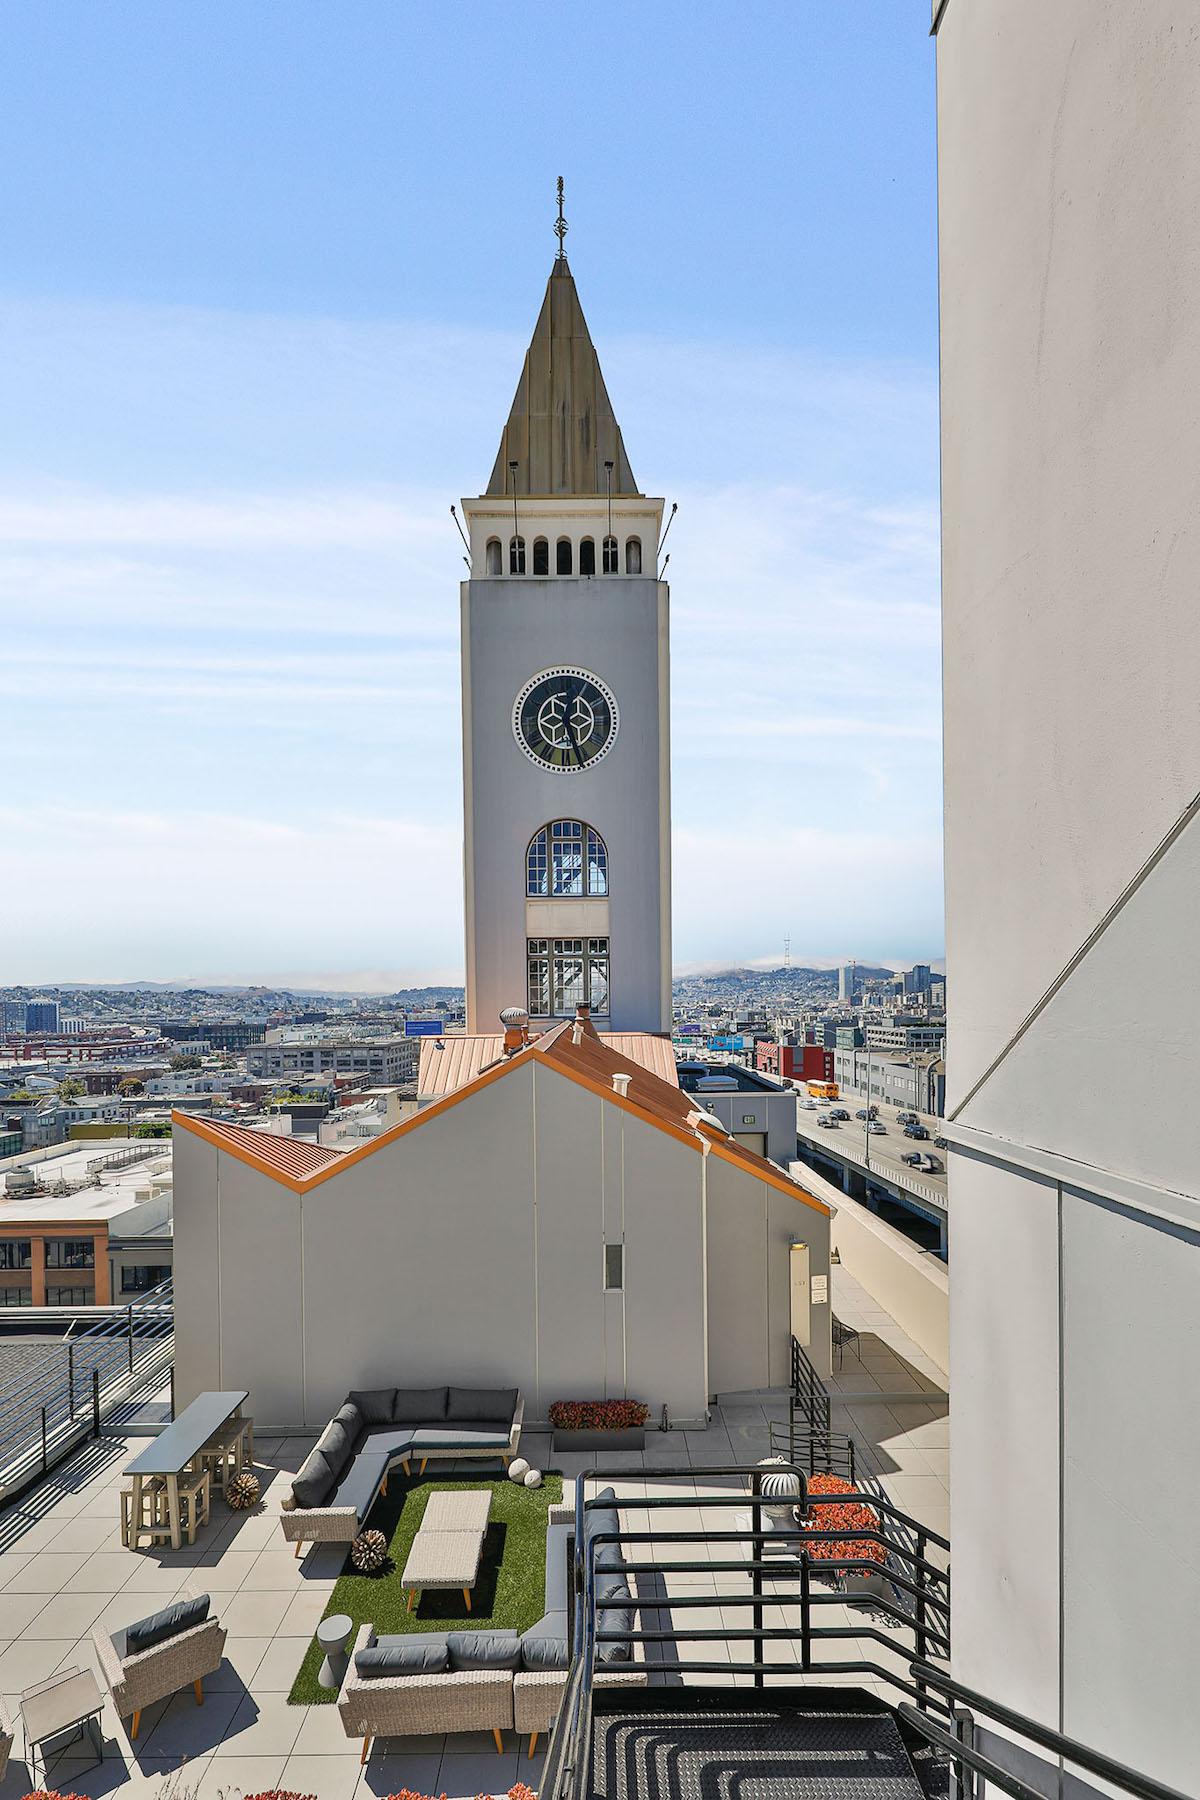 This Penthouse Sits Within a Historic San Francisco Clock Tower